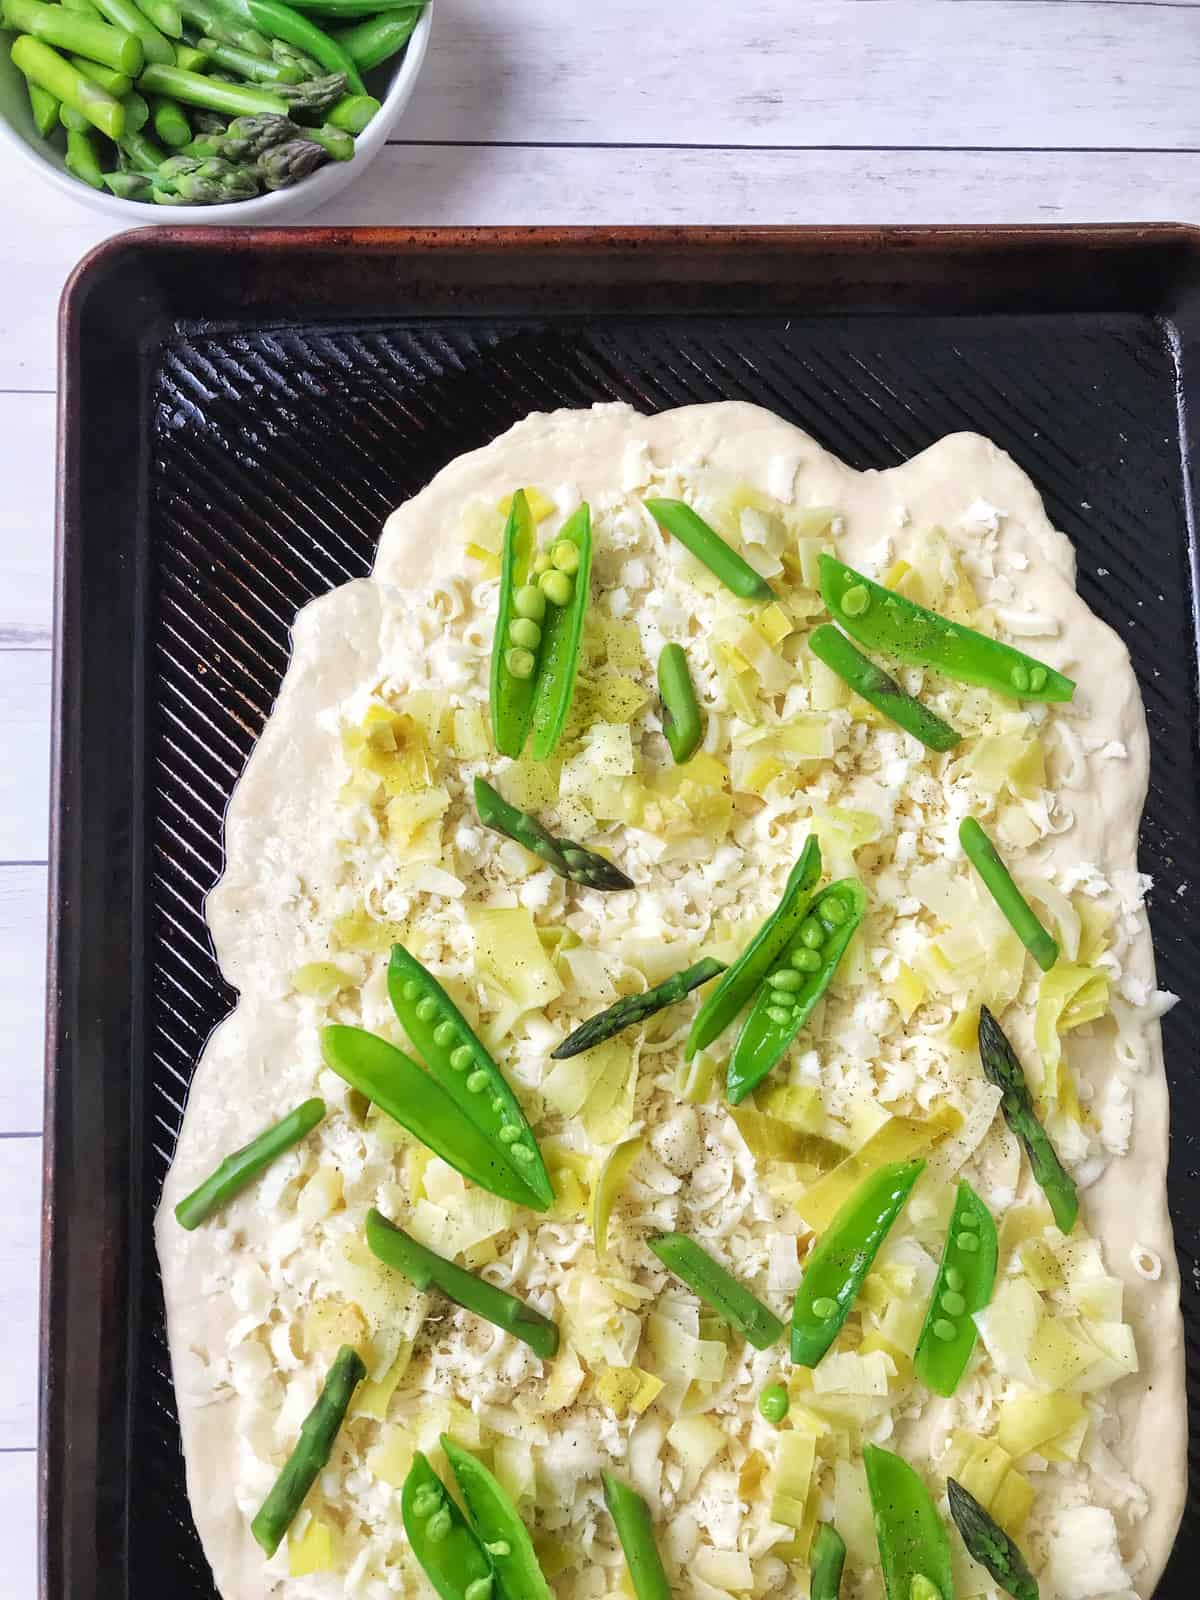 Spring Pizza with Asparagus, Leeks and Sugar Snap Peas